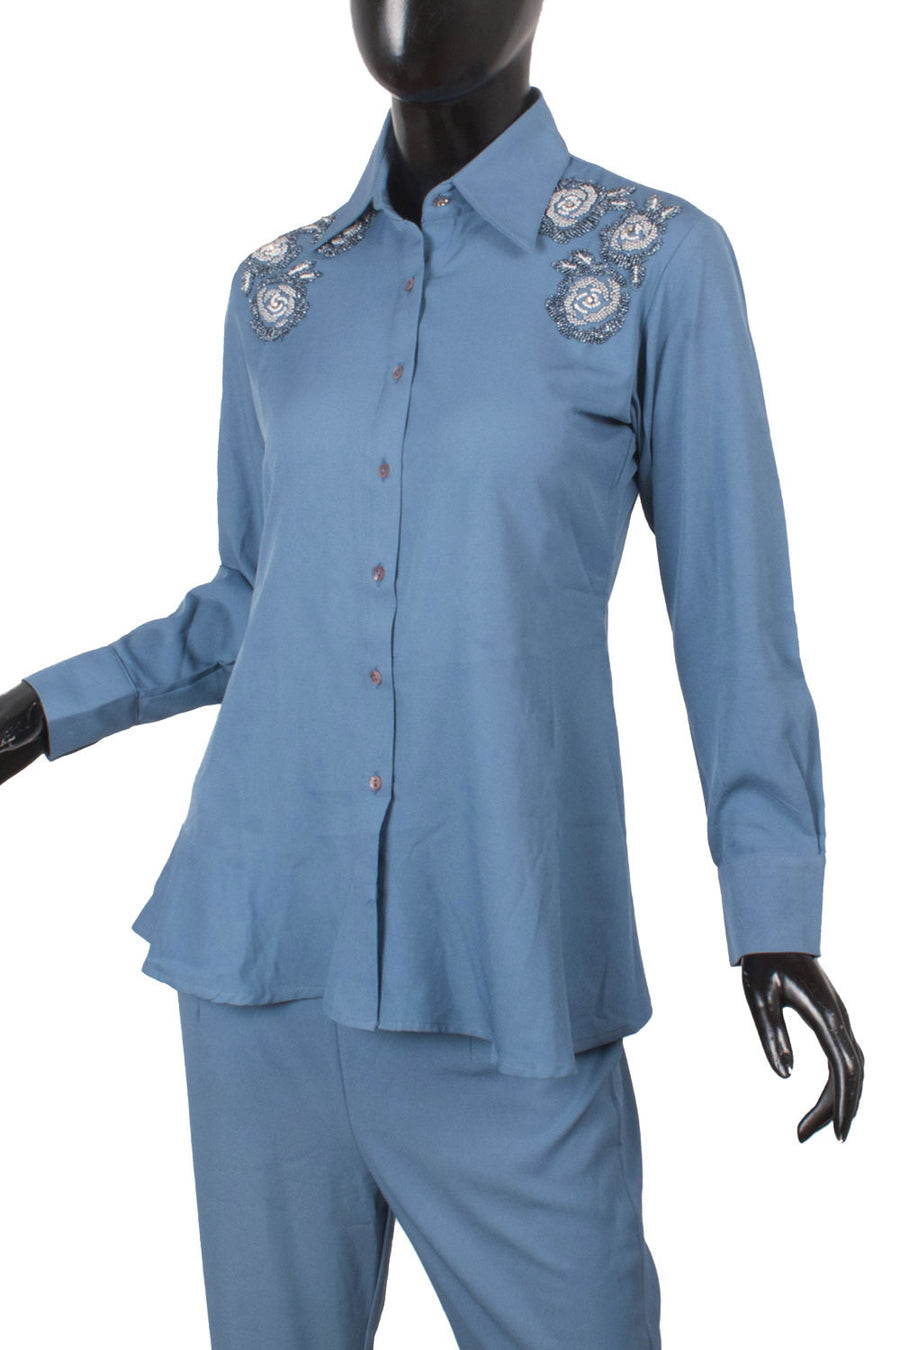 Handcrafted Viscose Cotton Coordinated Set with Beads Embellished Shoulder and Bell Pant